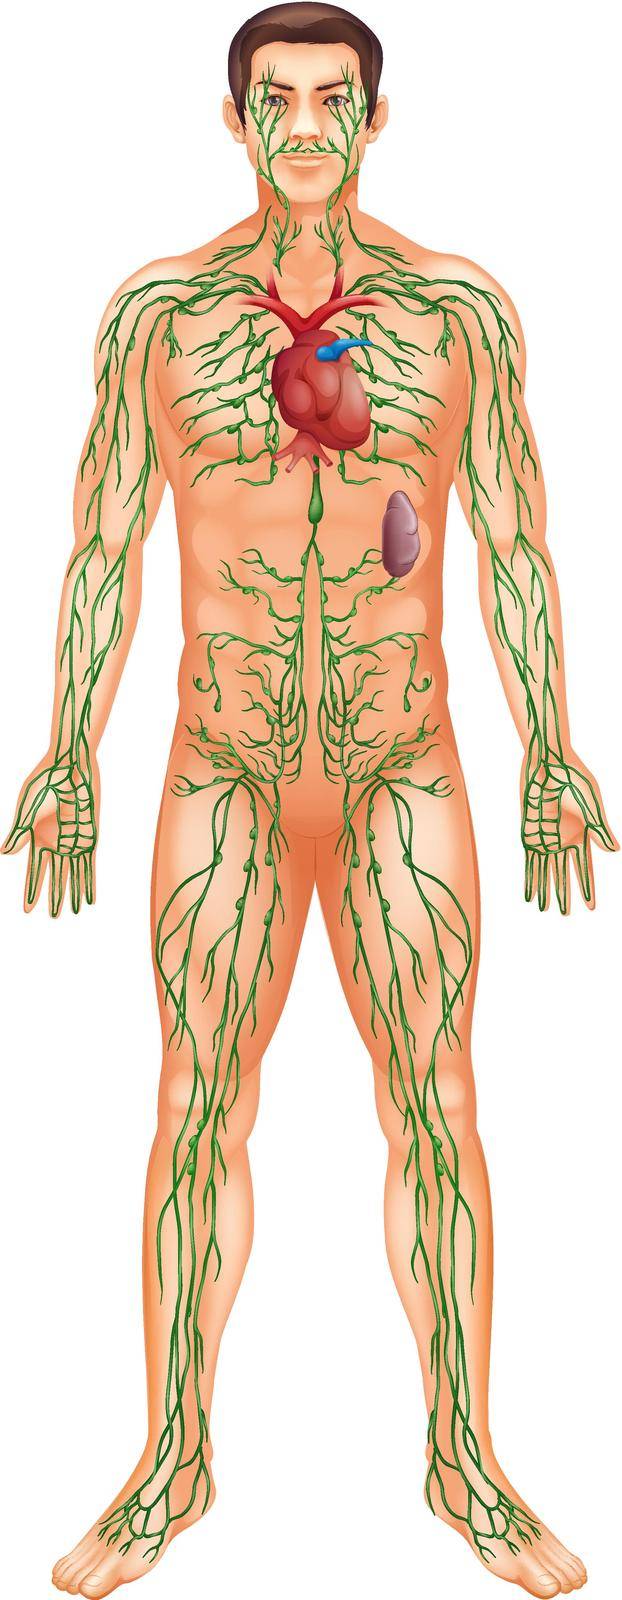 Illustration of the Lymphatic System